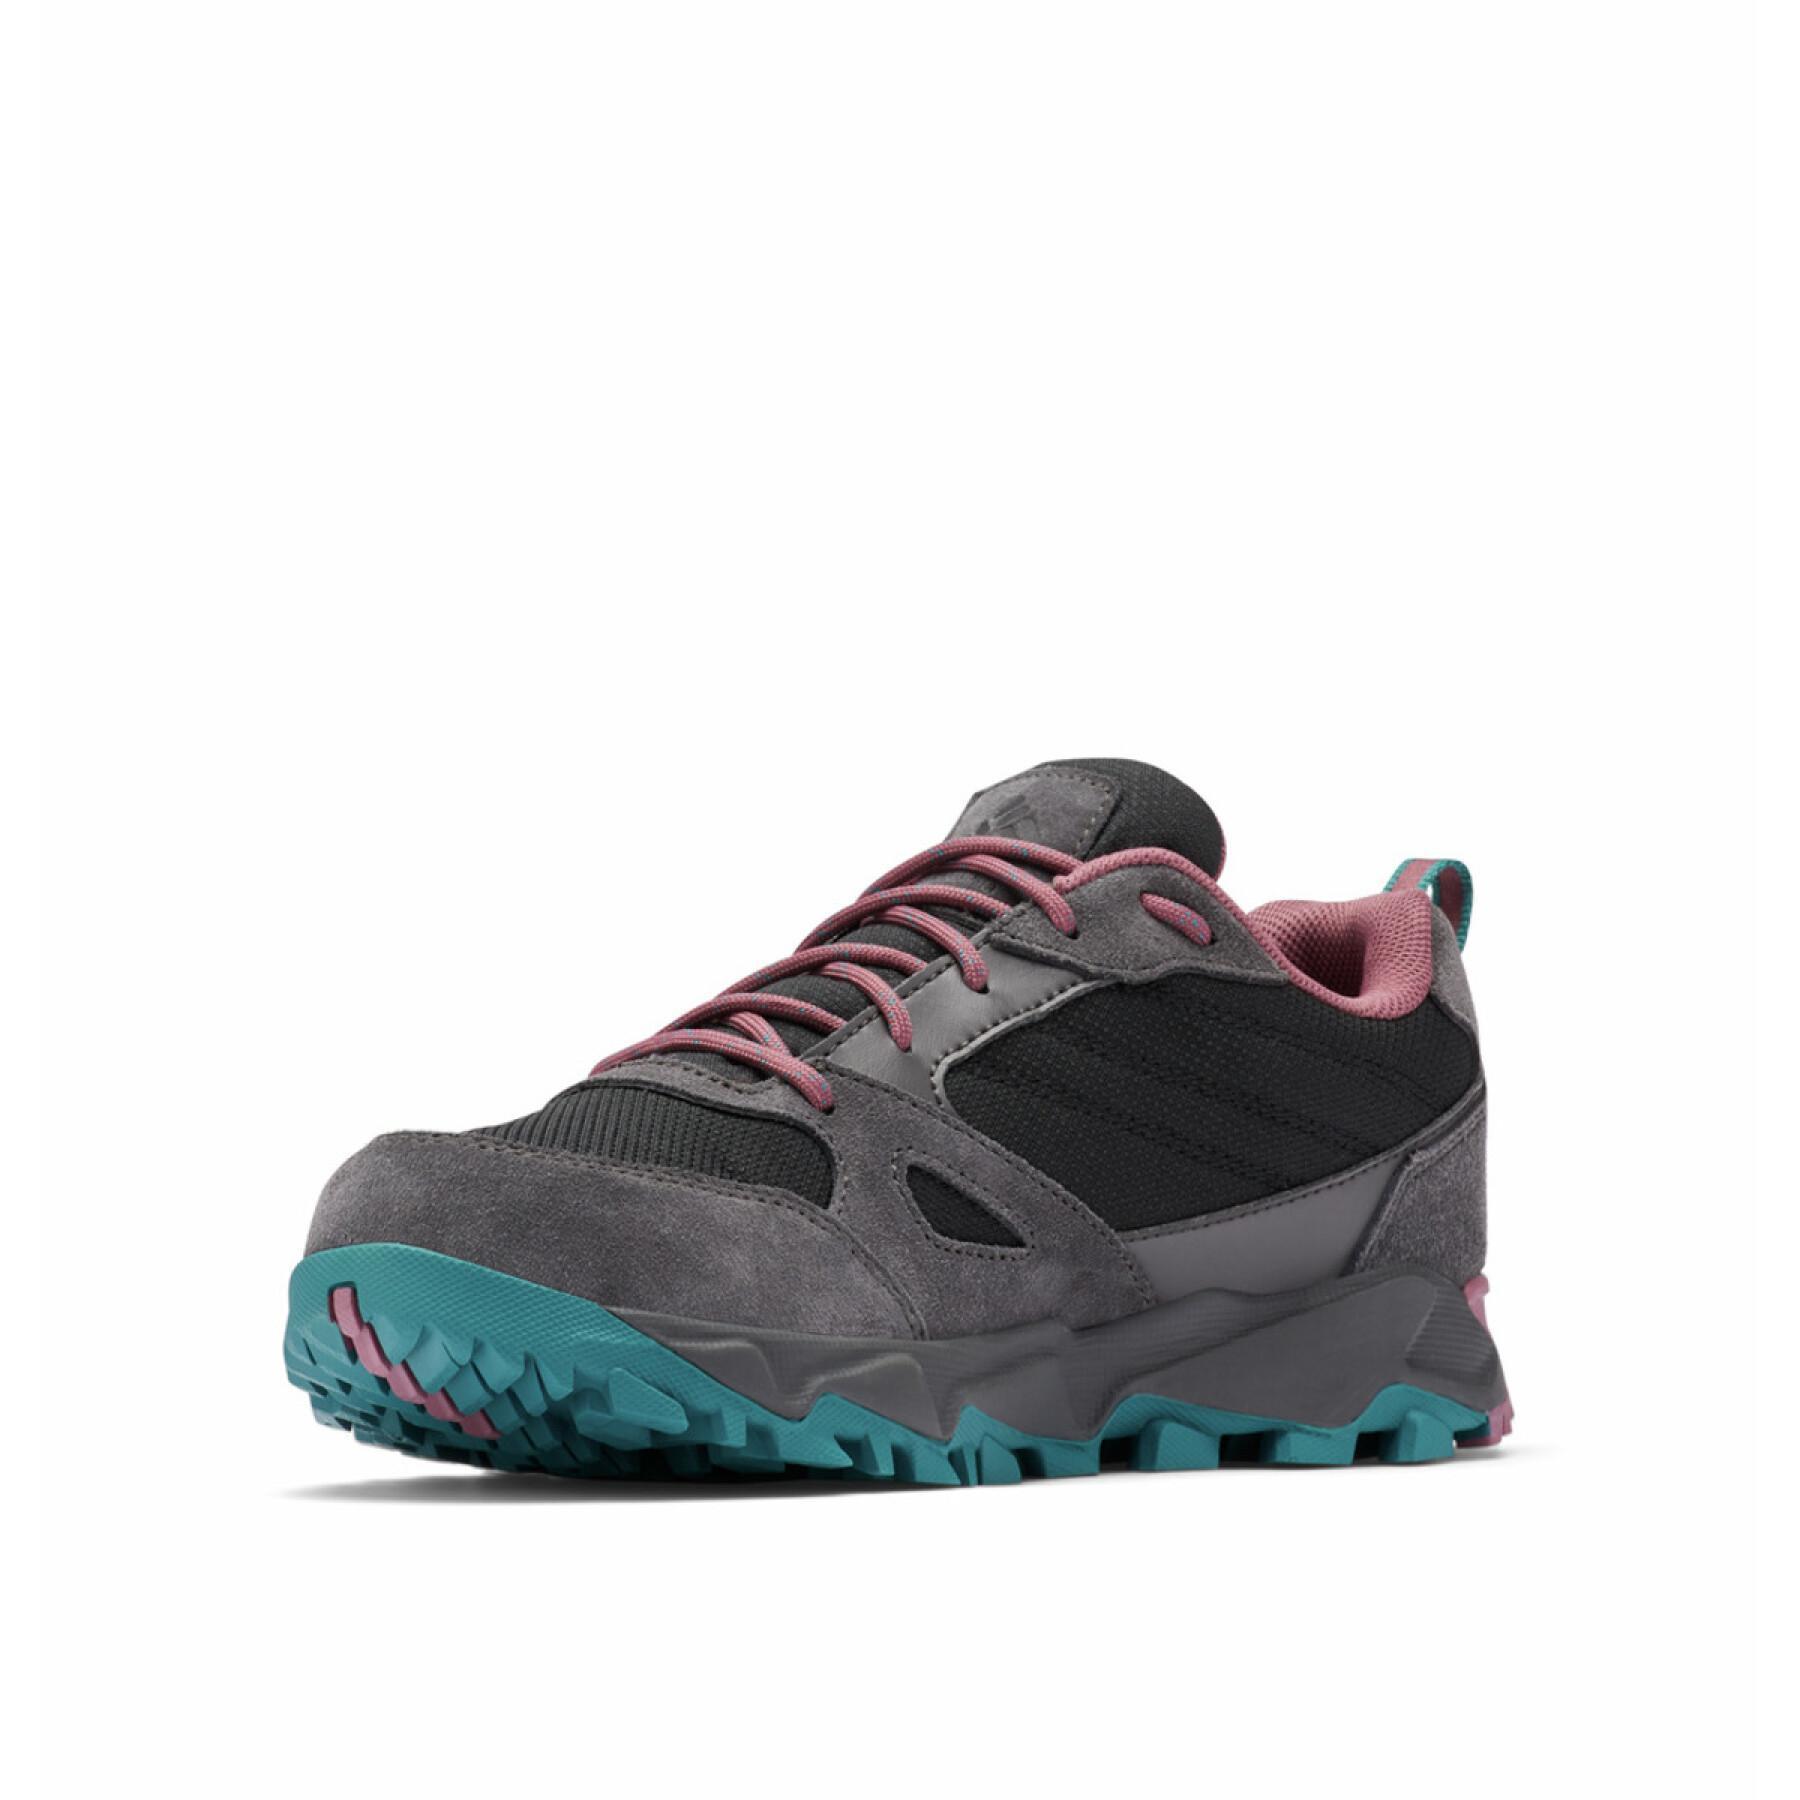 Zapatos de mujer Columbia IVO TRAIL WP